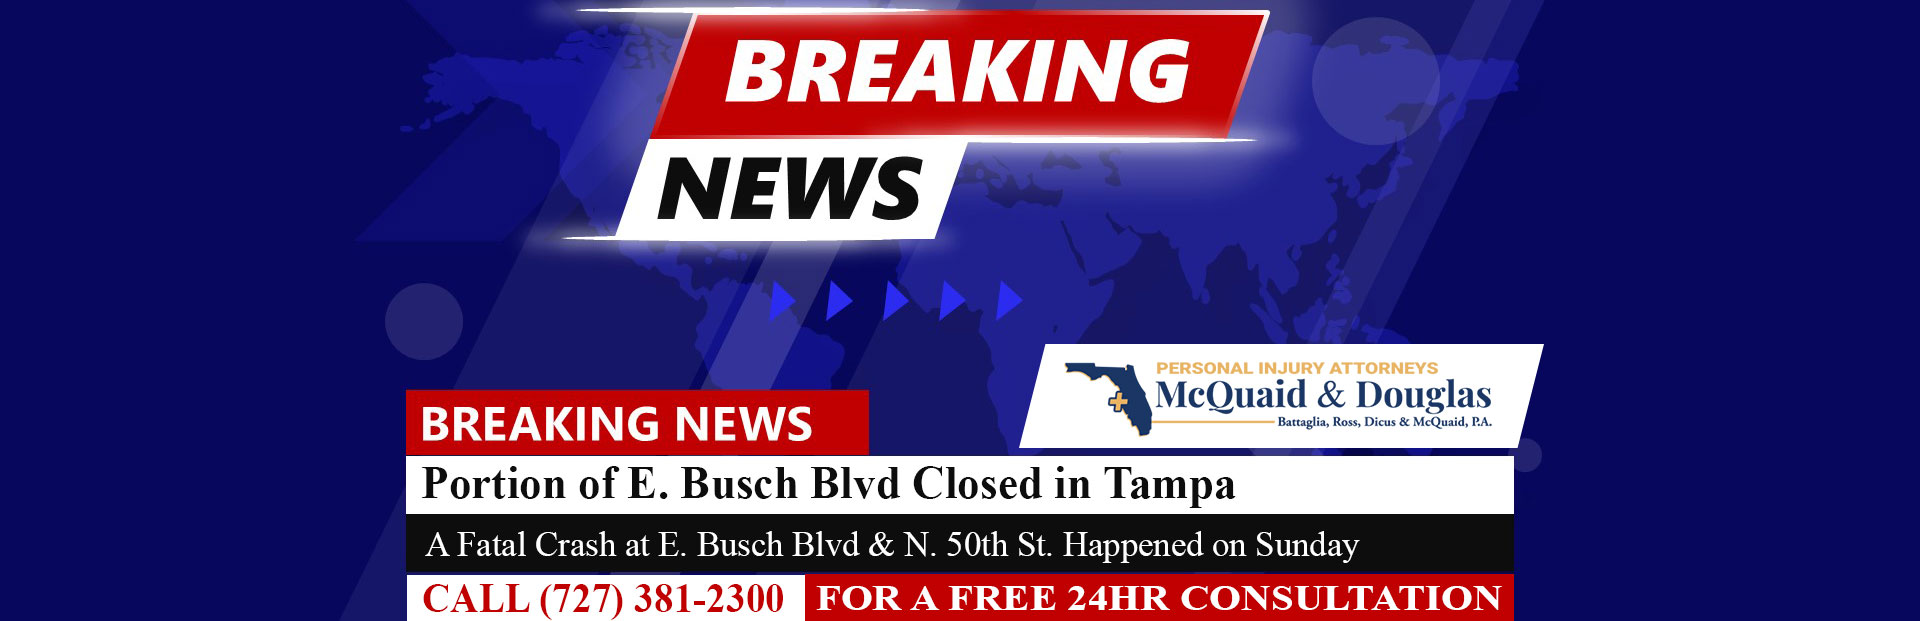 [01-07-24] Portion of E. Busch Blvd Closed in Tampa After Fatal Vehicle vs. Pedestrian Crash